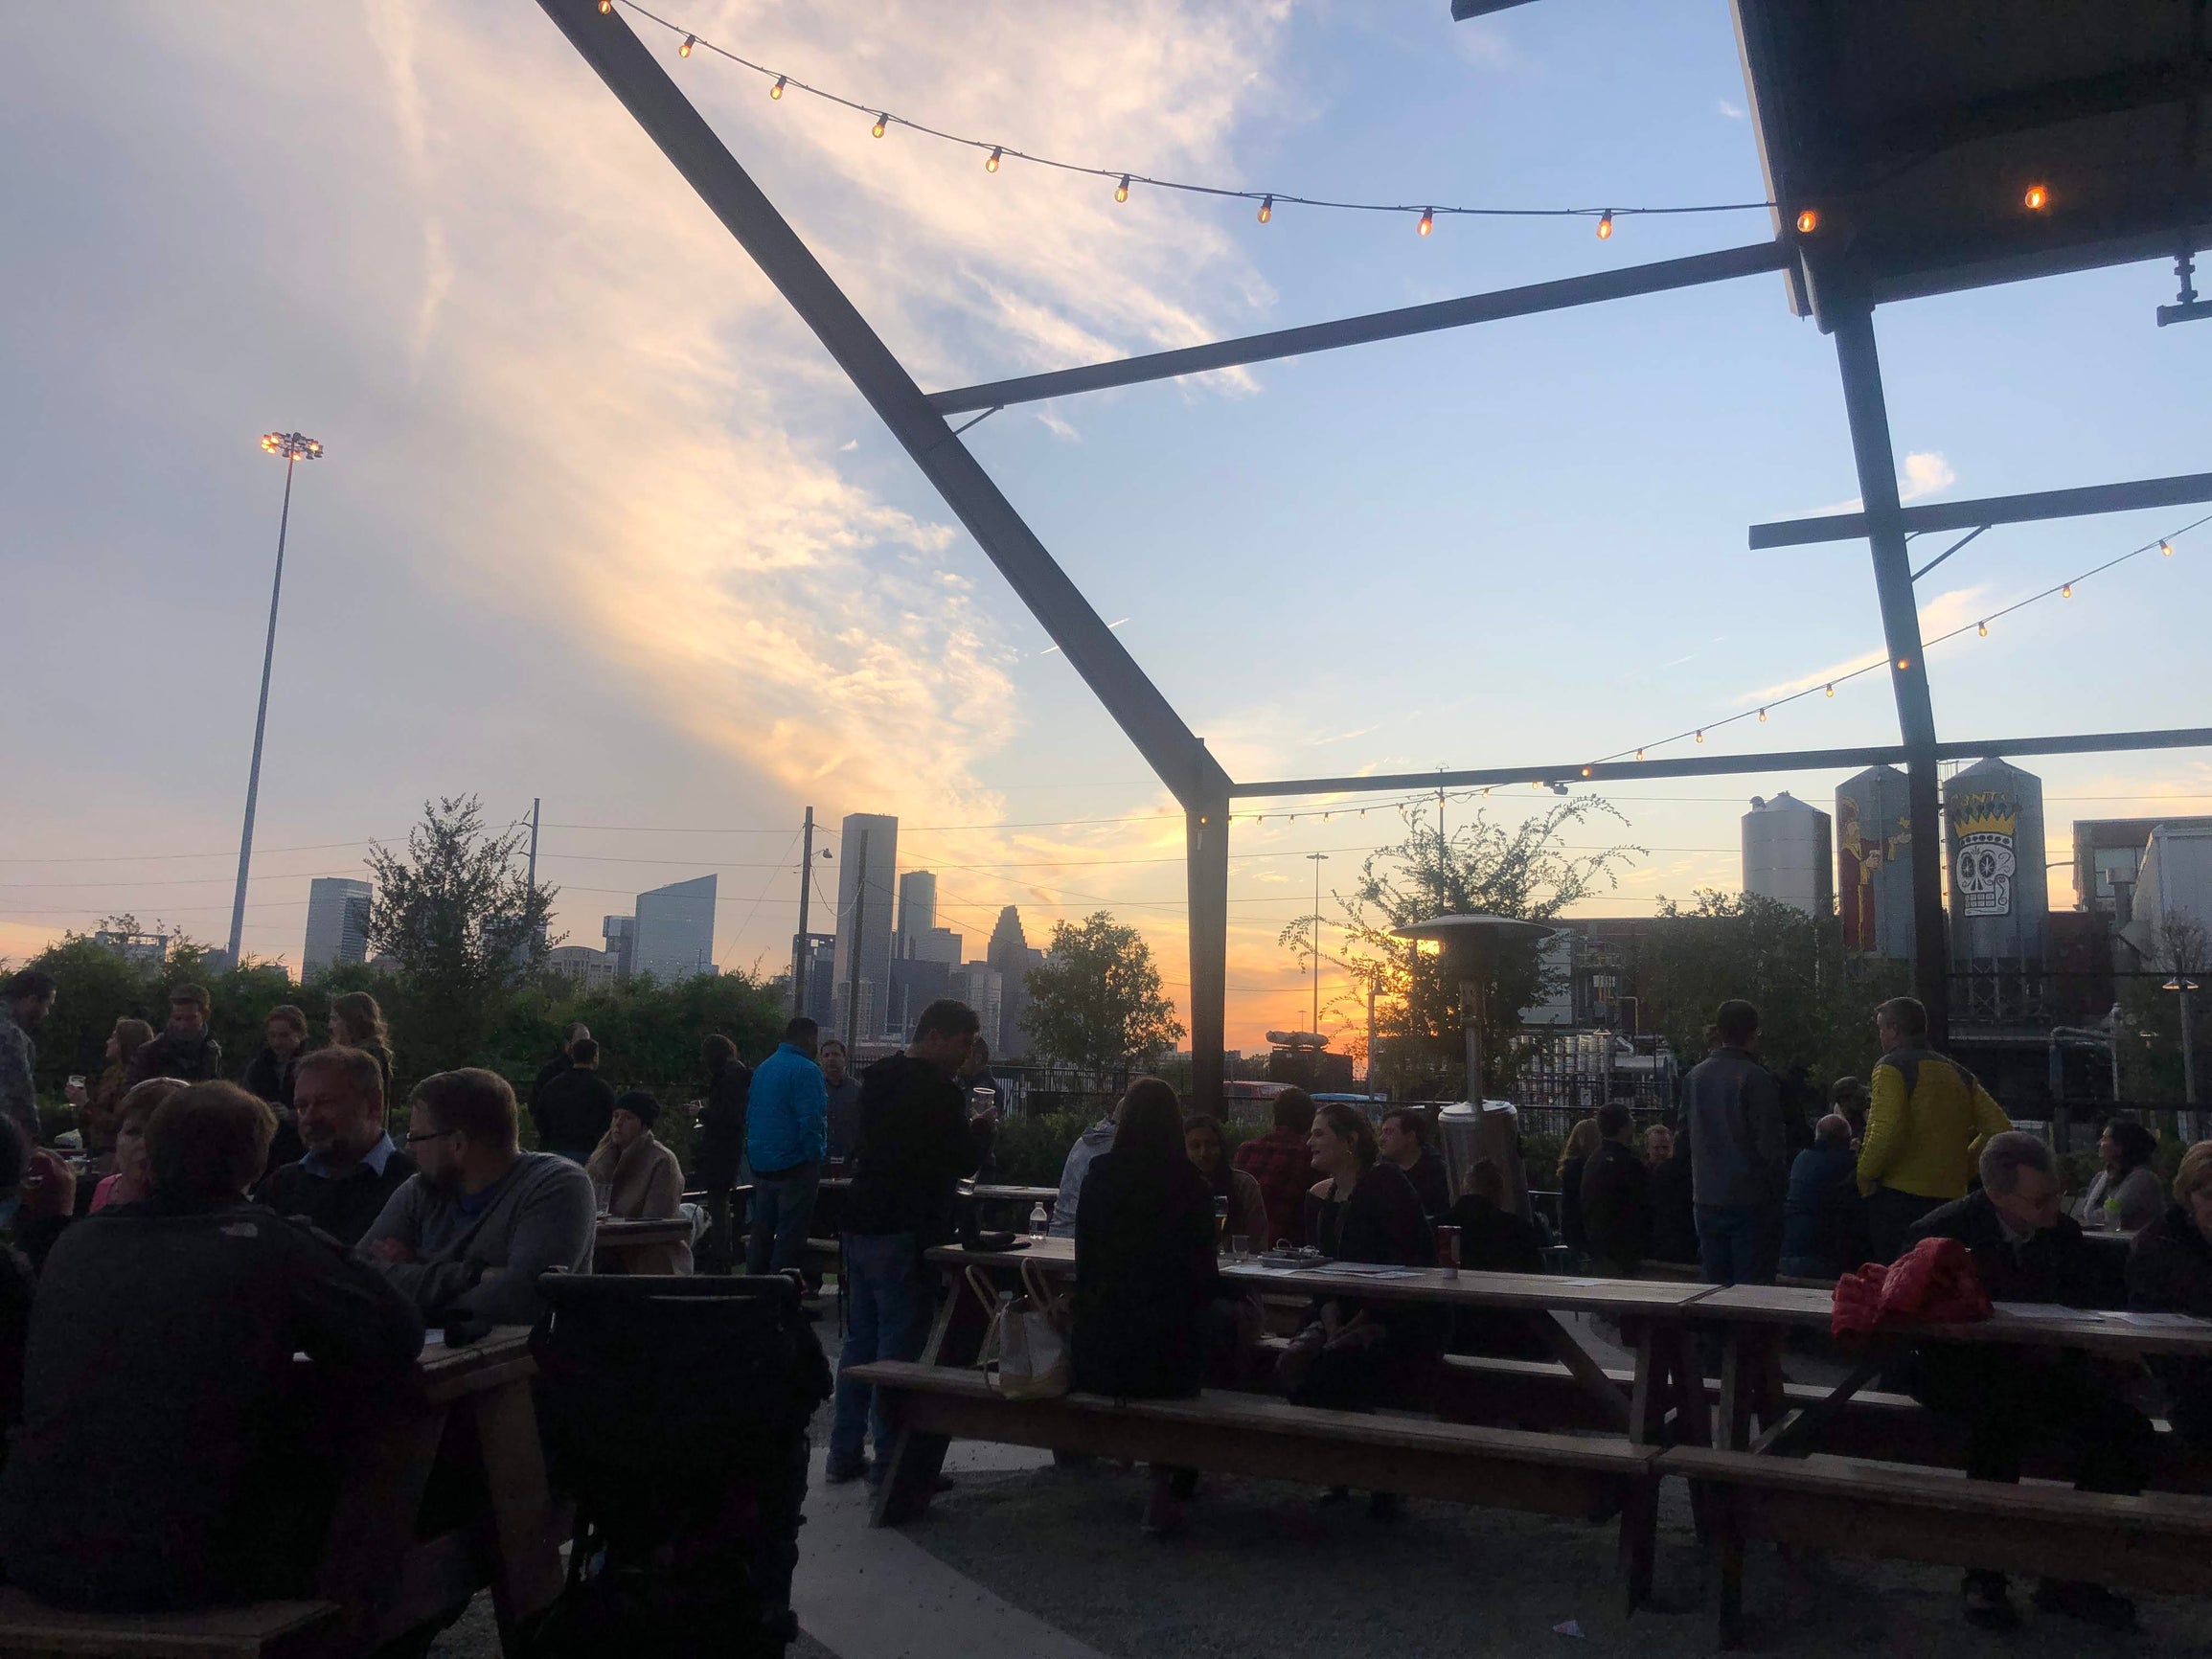 View of the downtown Houston skyline from the outdoor patio of St. Arnold's Beer Garden.